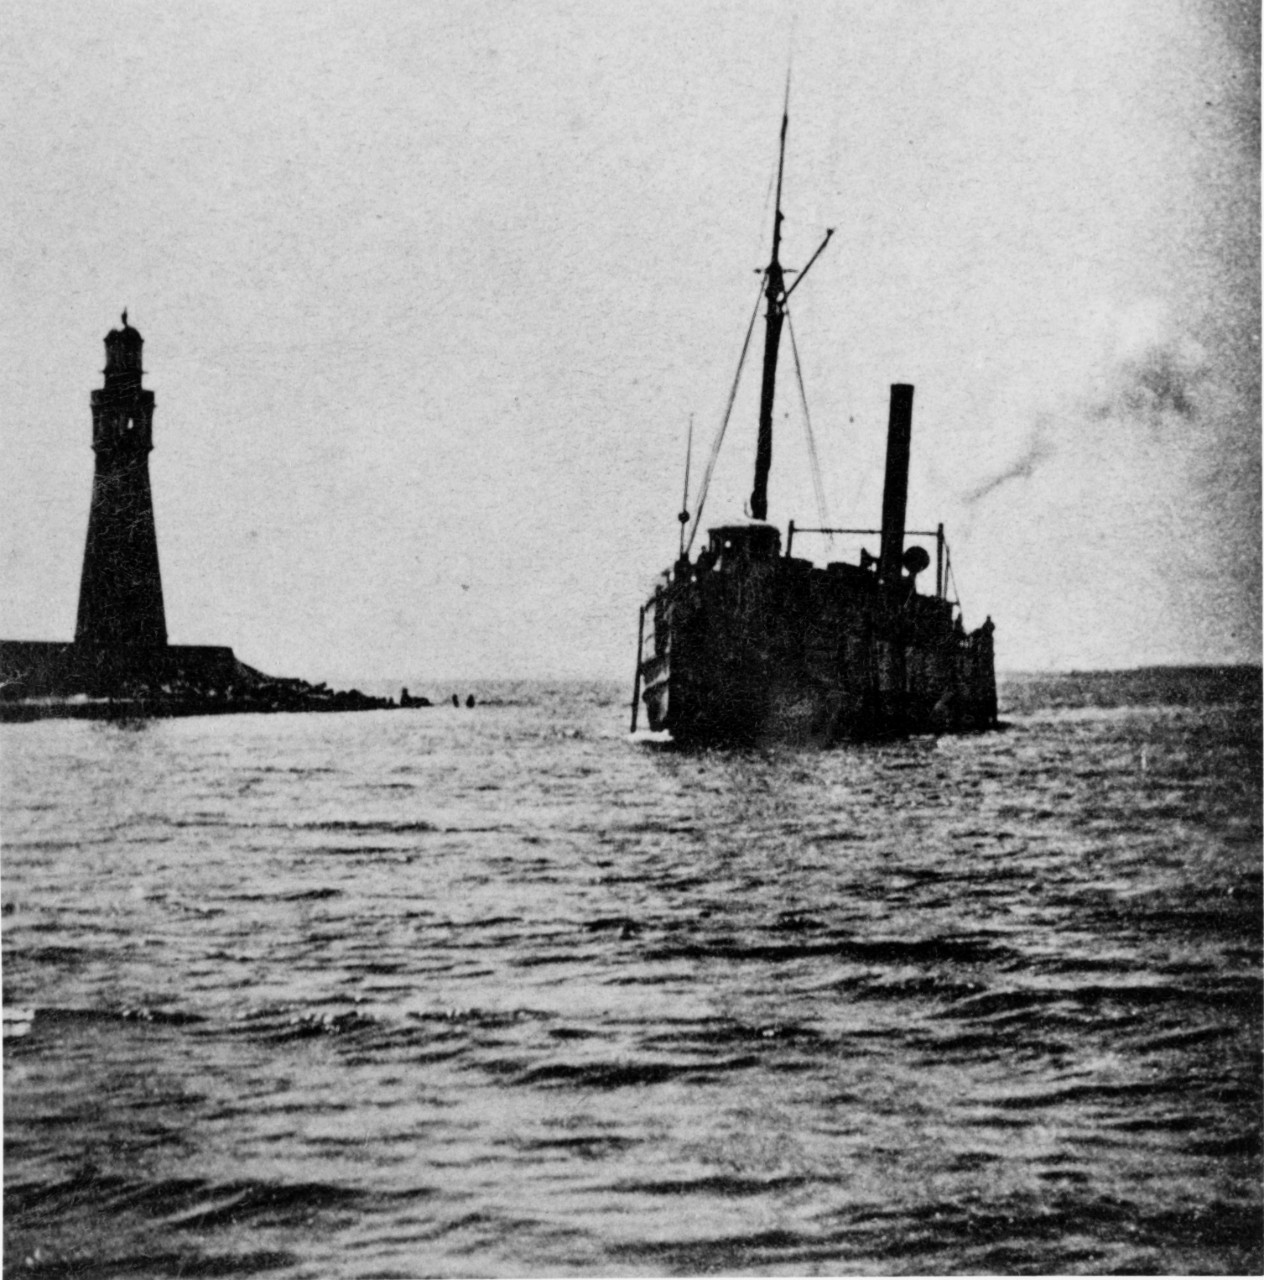 "View in Buffalo Harbor". Stereo pair photograph, showing a small Great Lakes Steamer inbound from Lake Erie, with Buffalo Breakwater Lighthouse at left, circa the 1880s